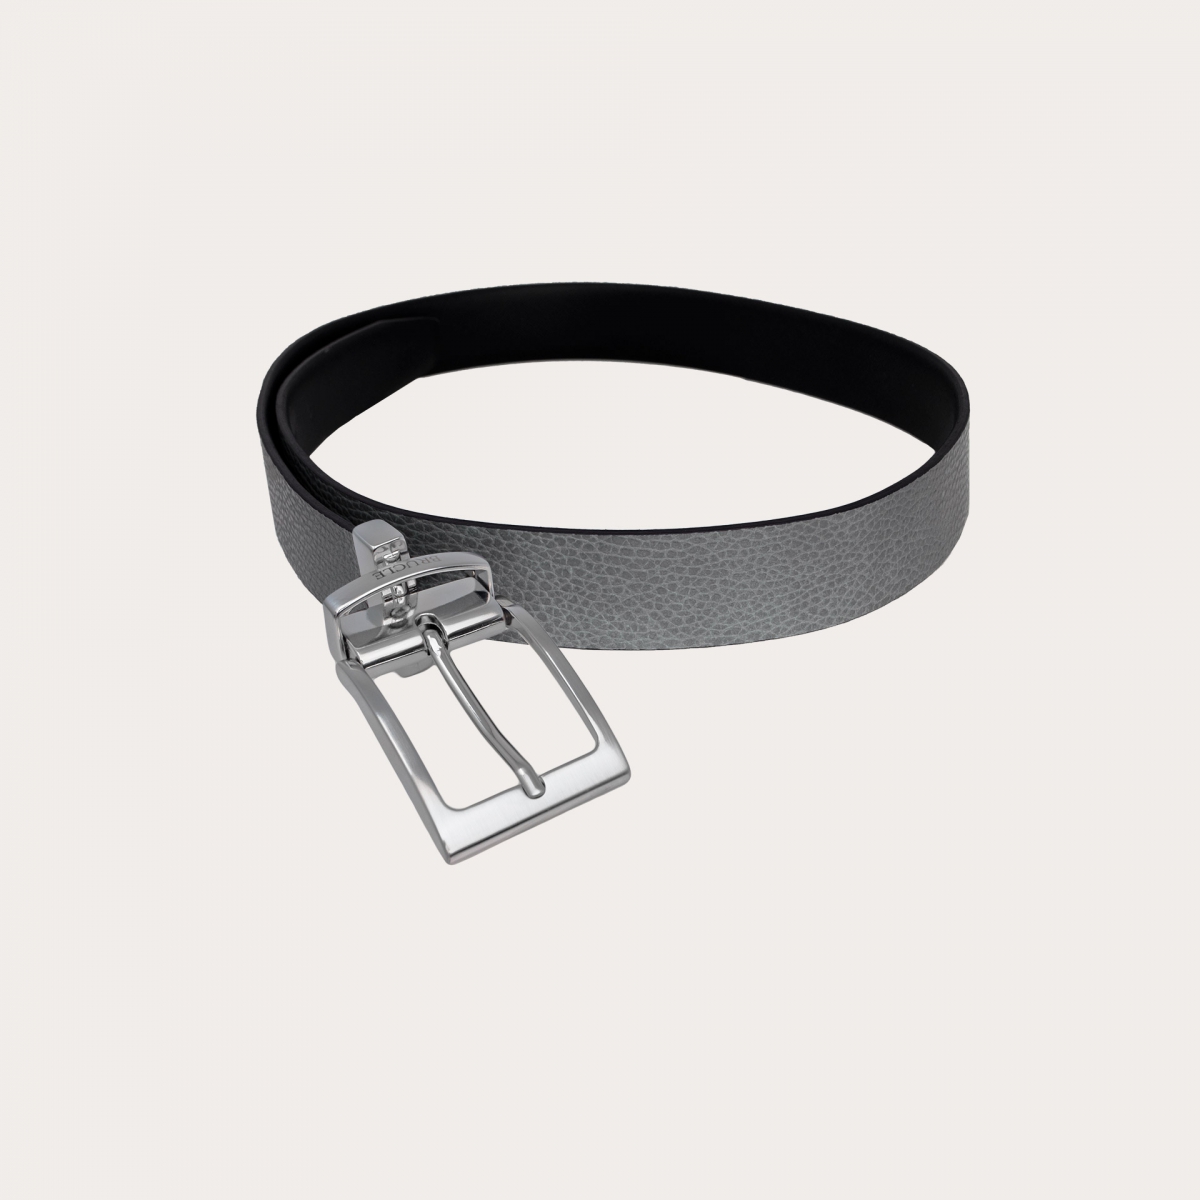 Reversible Saffiano Leather Belt in Navy Blue and Grey Nickel Free